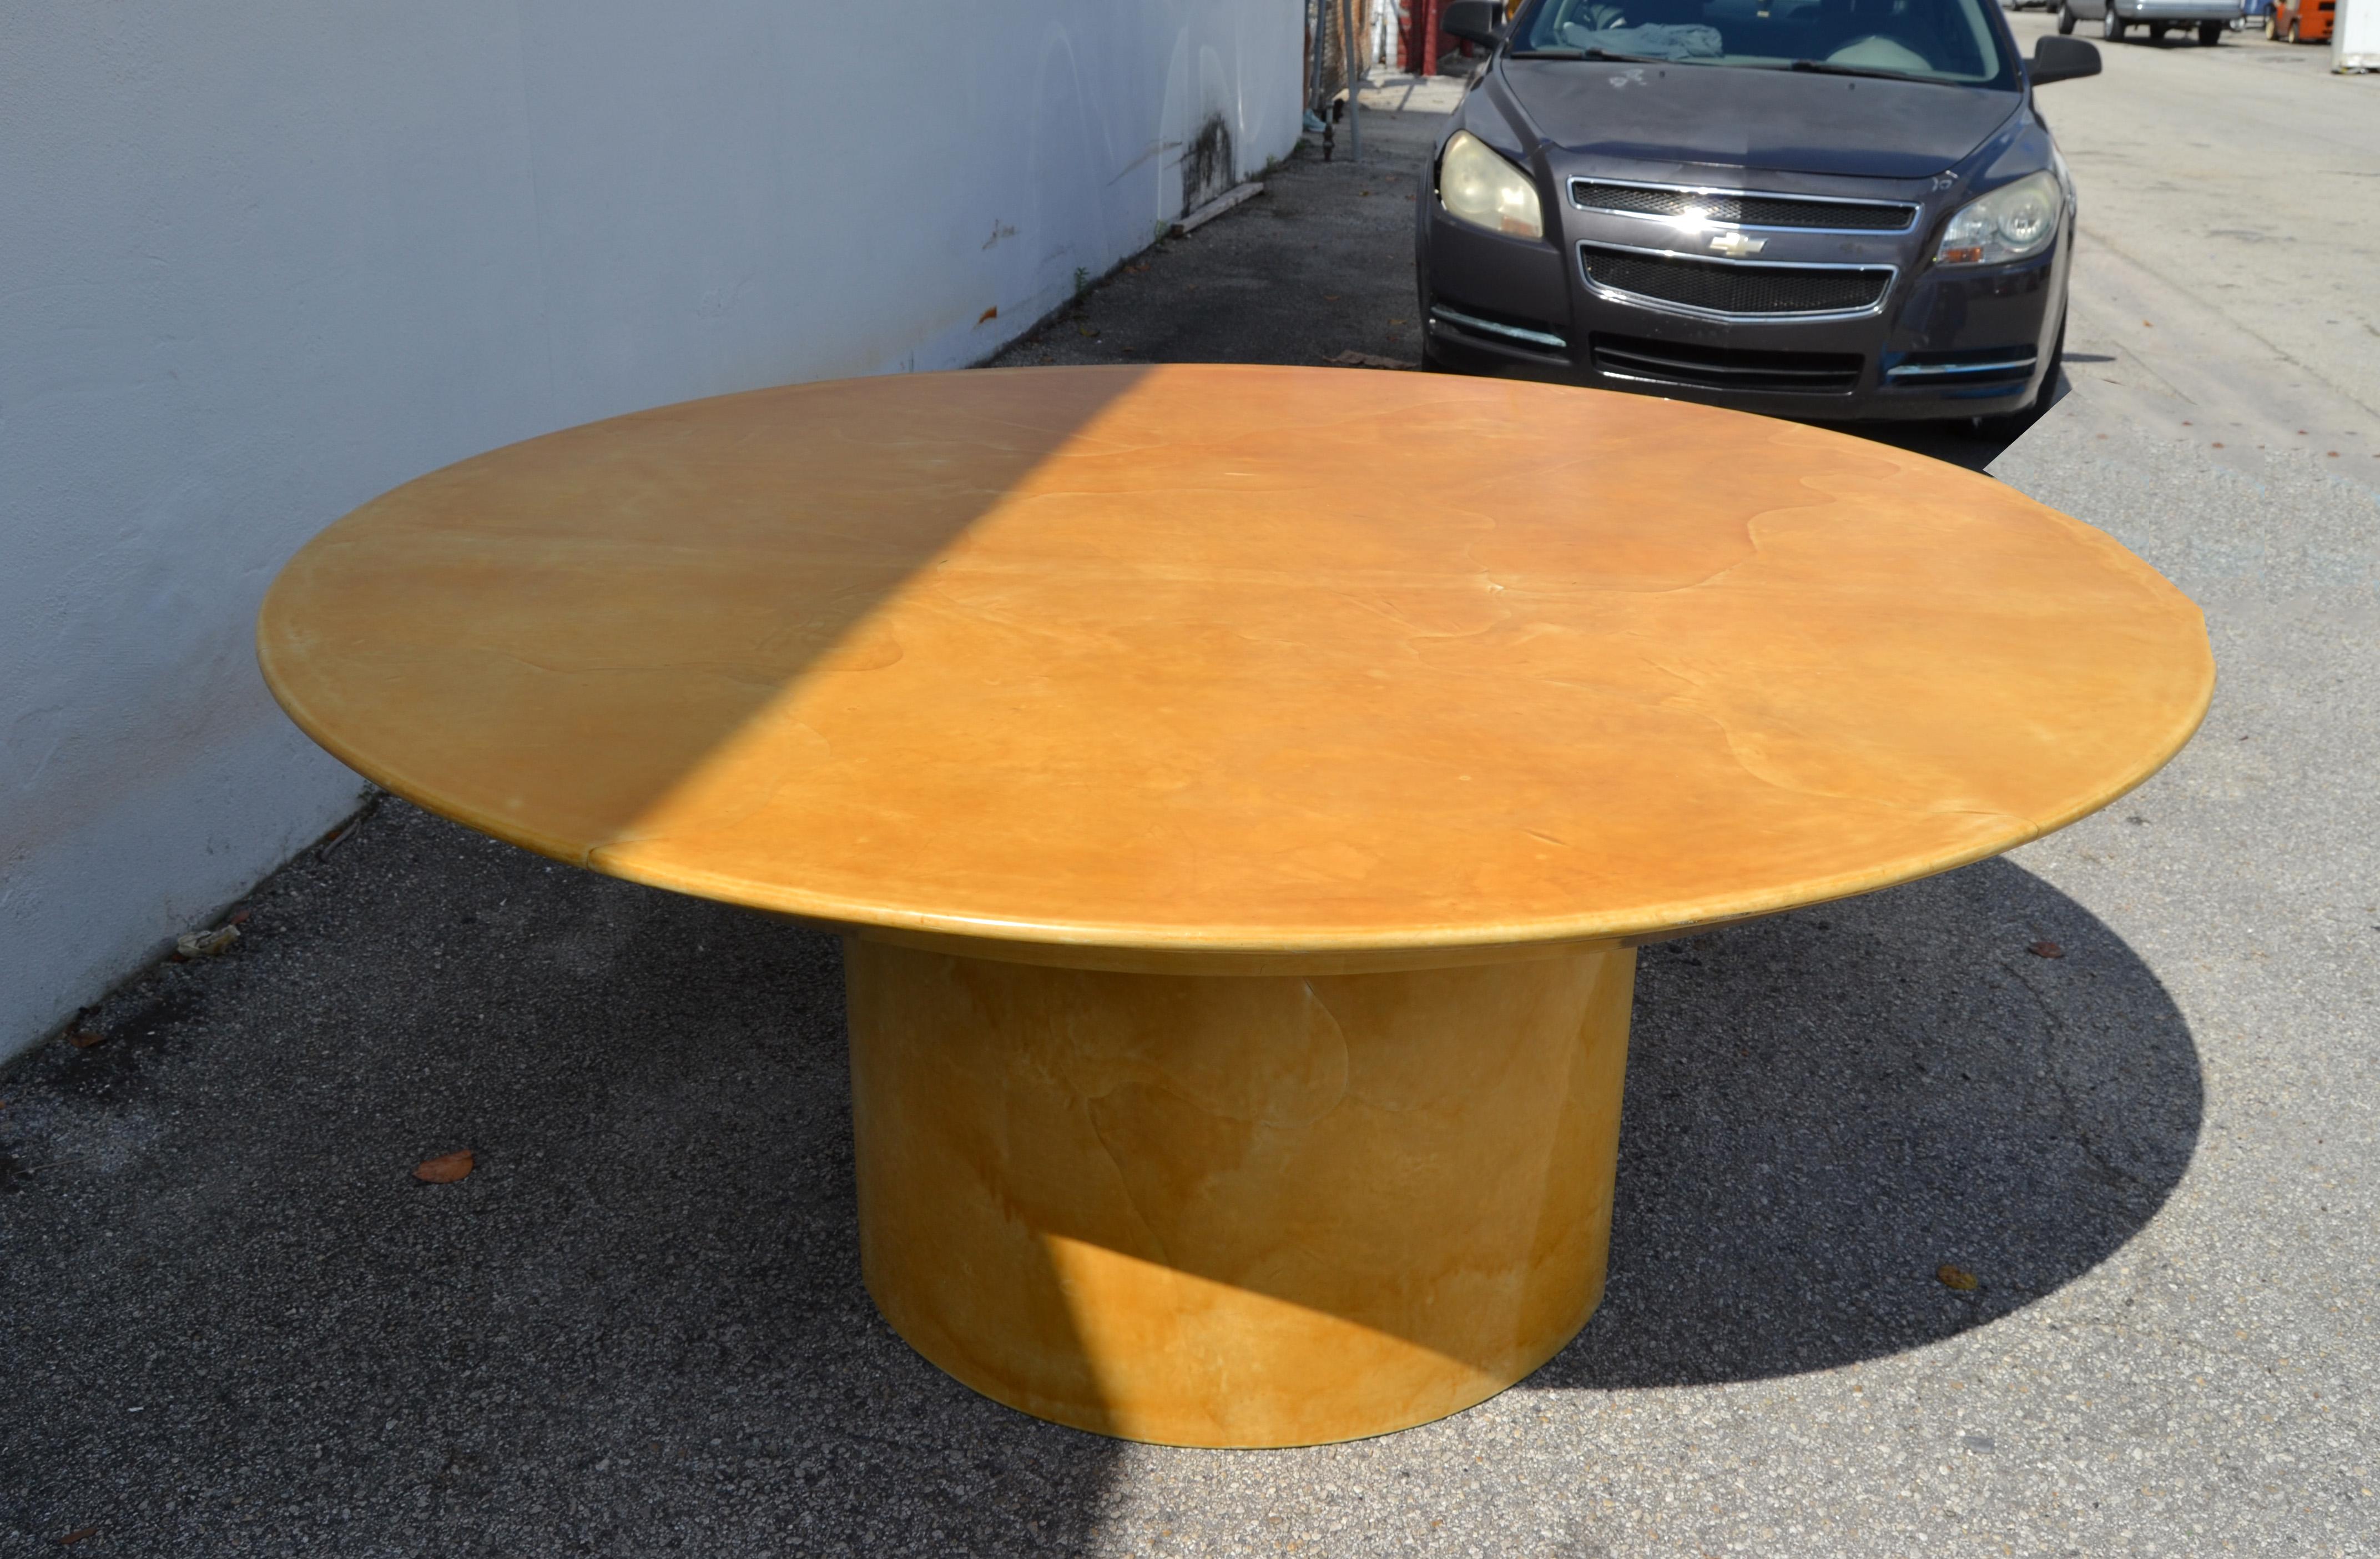 American Karl Spring Mid-Century Modern Lacquered Goat Skin Dining, Conference Table 70s For Sale